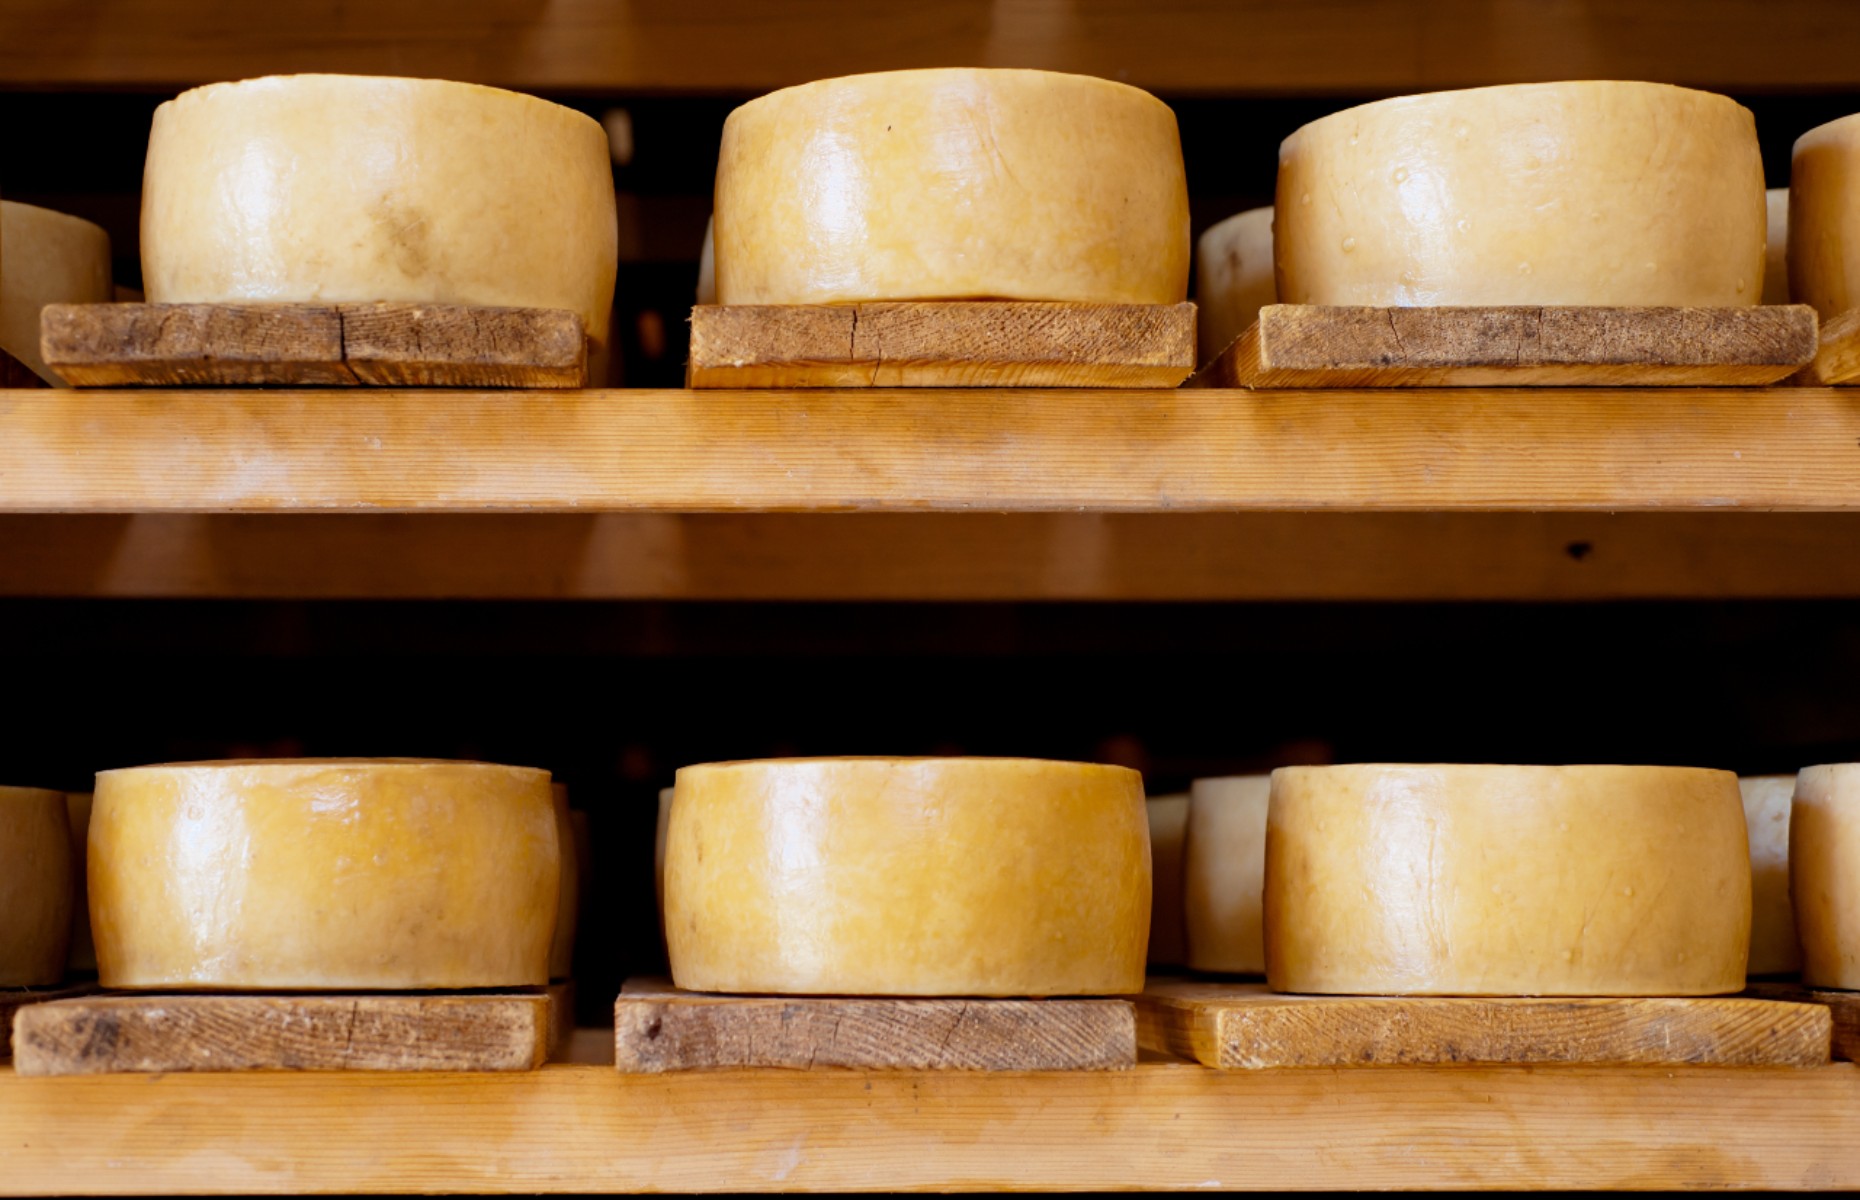 Cheese from Pag island (Image: Natalia Bratslavsky/Shutterstock)